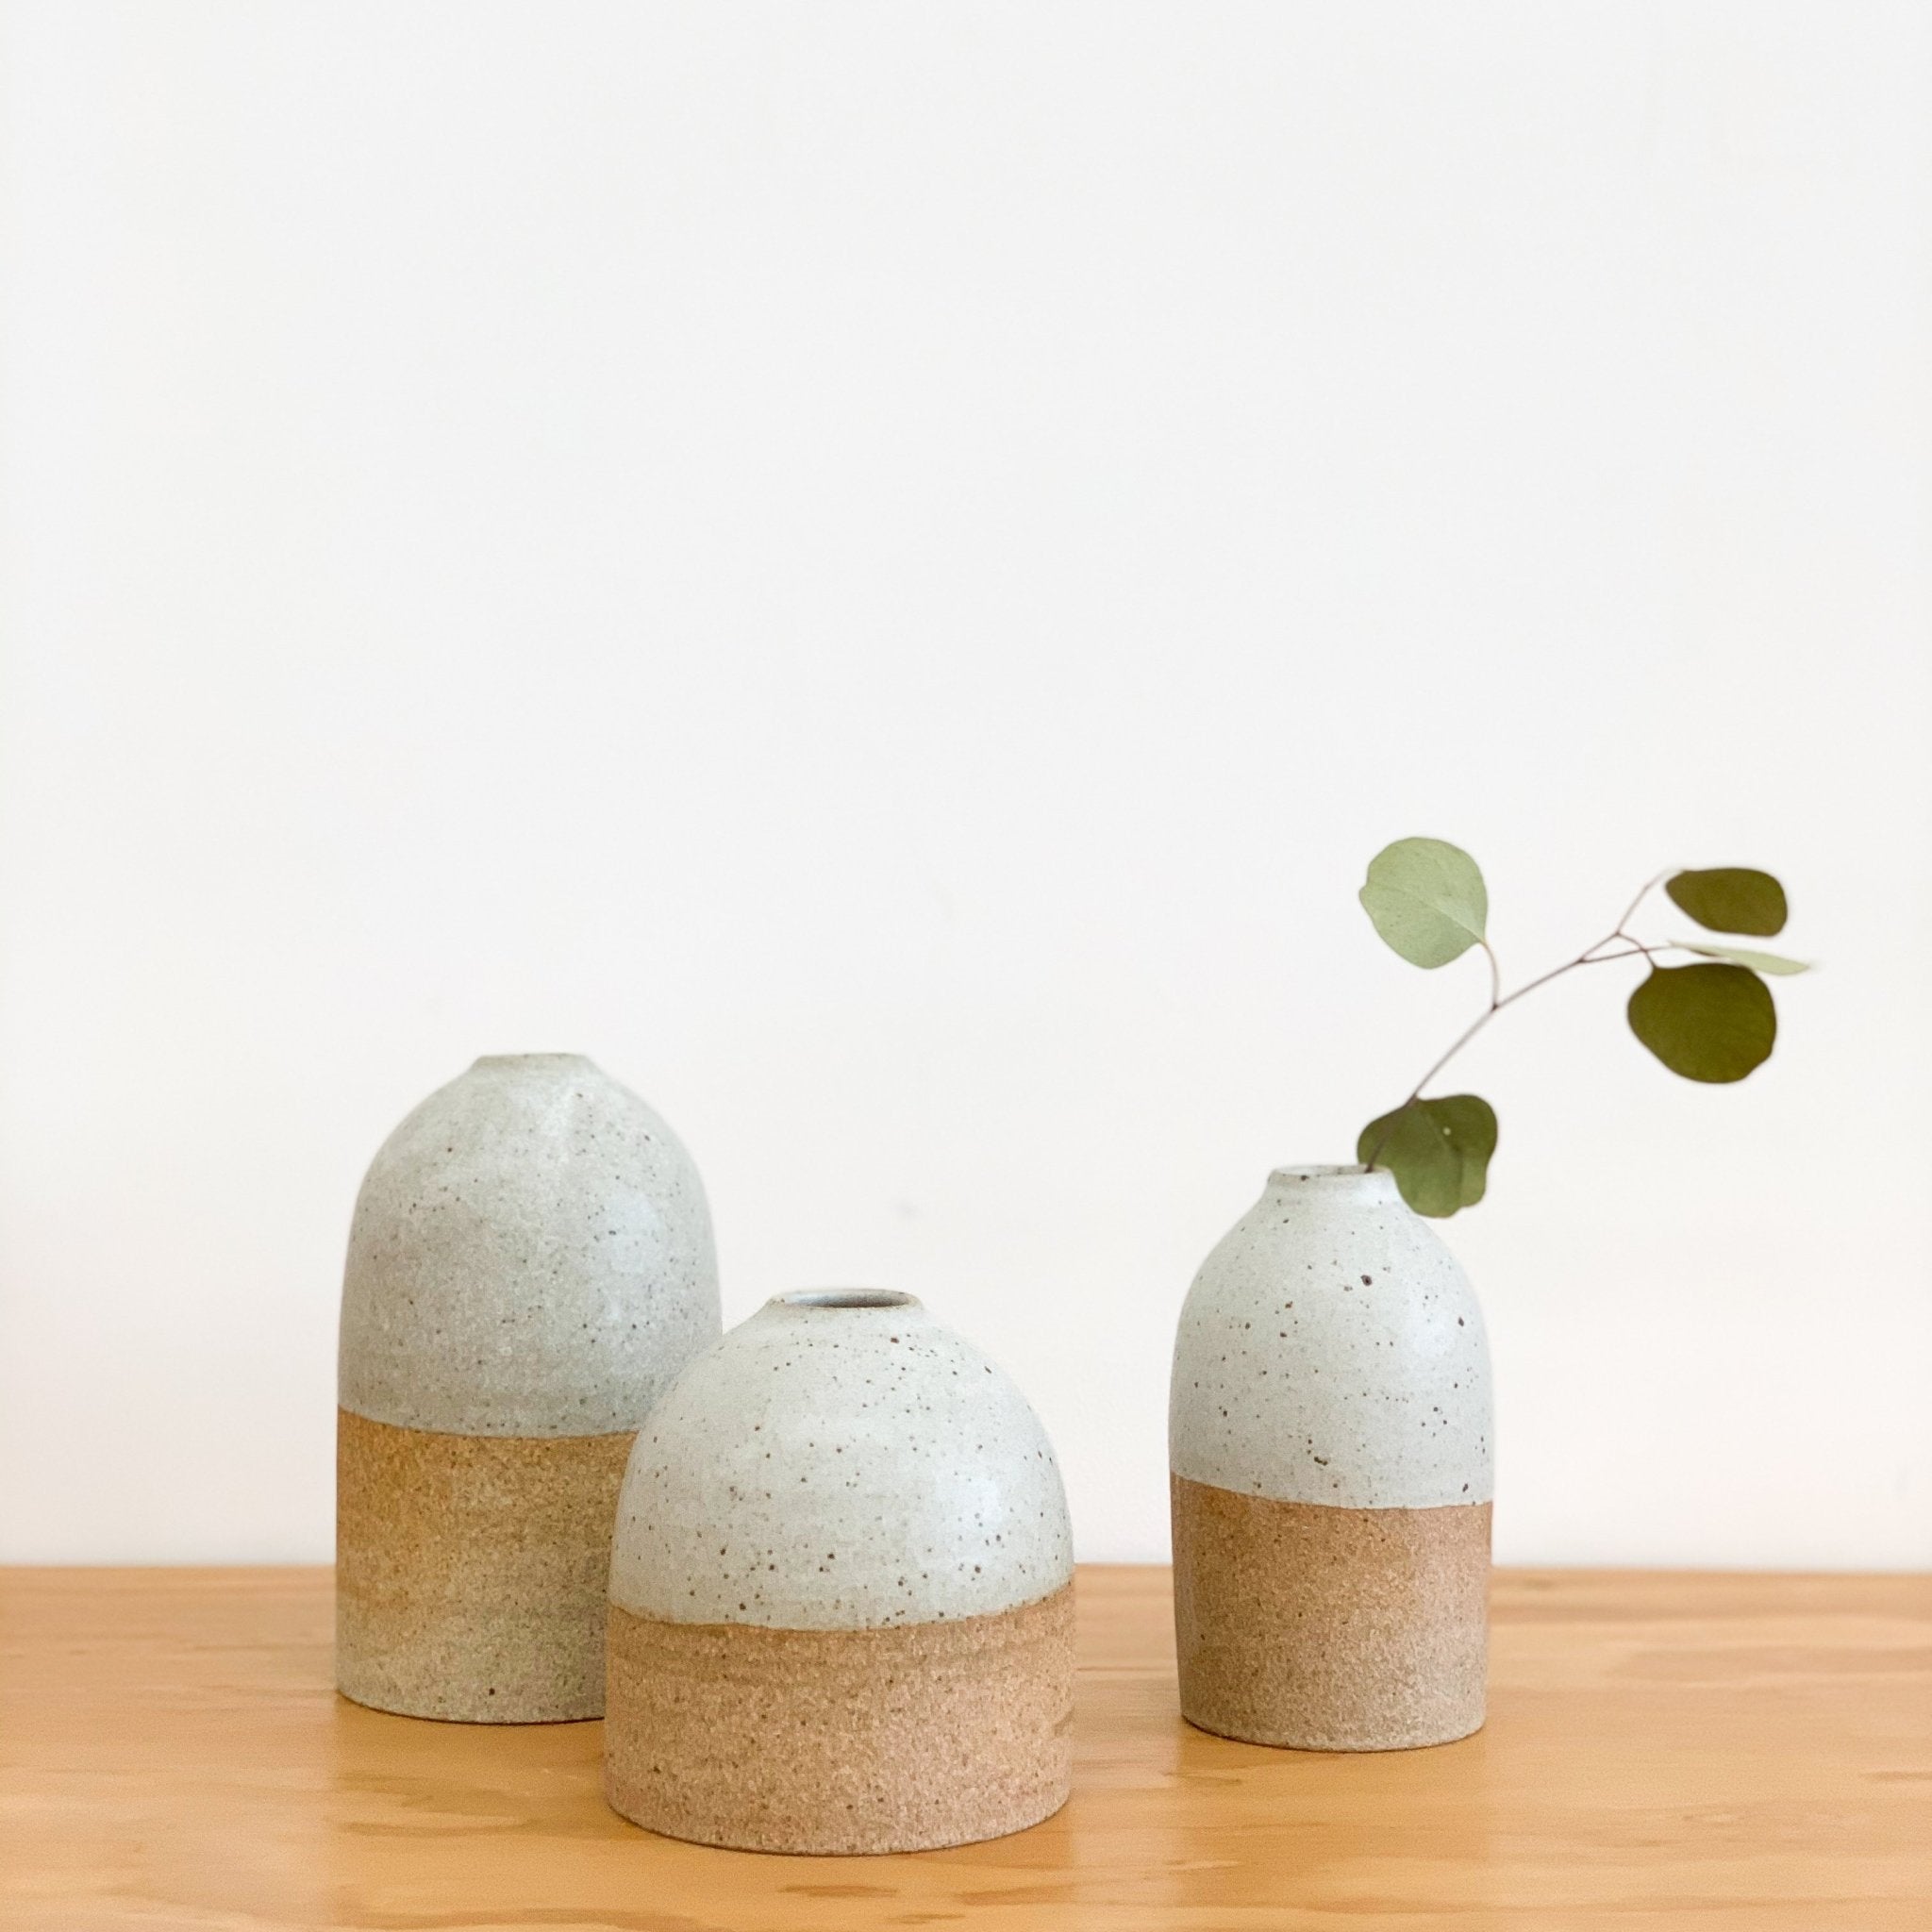 A cluster of Tomoro Morisaki's organic and rounded bud vases with dry leaf